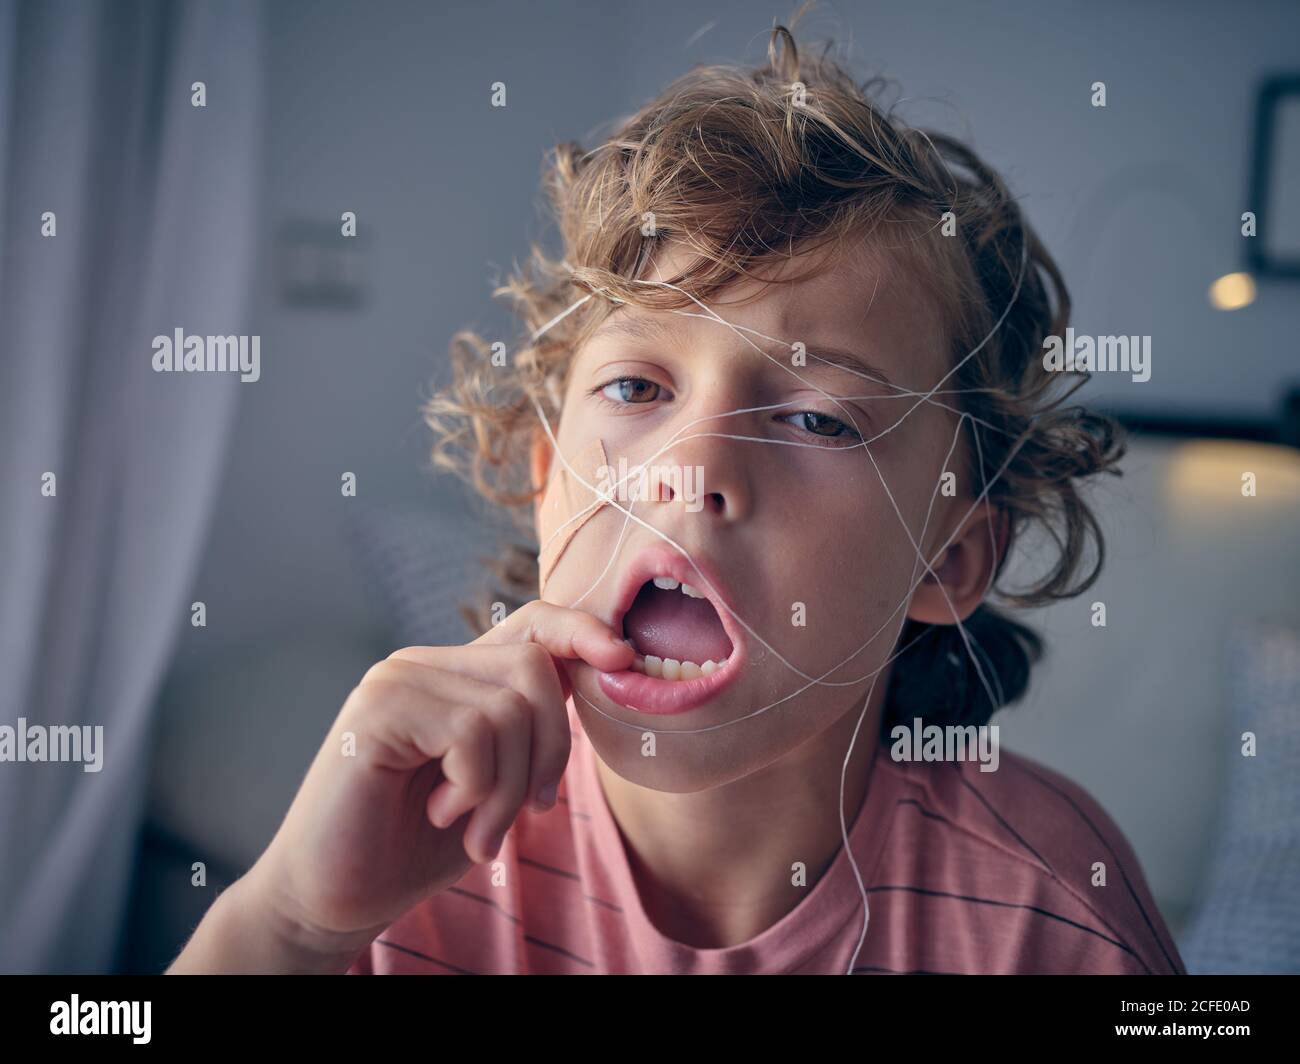 Naughty kid tangling in dental floss making faces while tiring floss to tooth to pull it out looking away Stock Photo